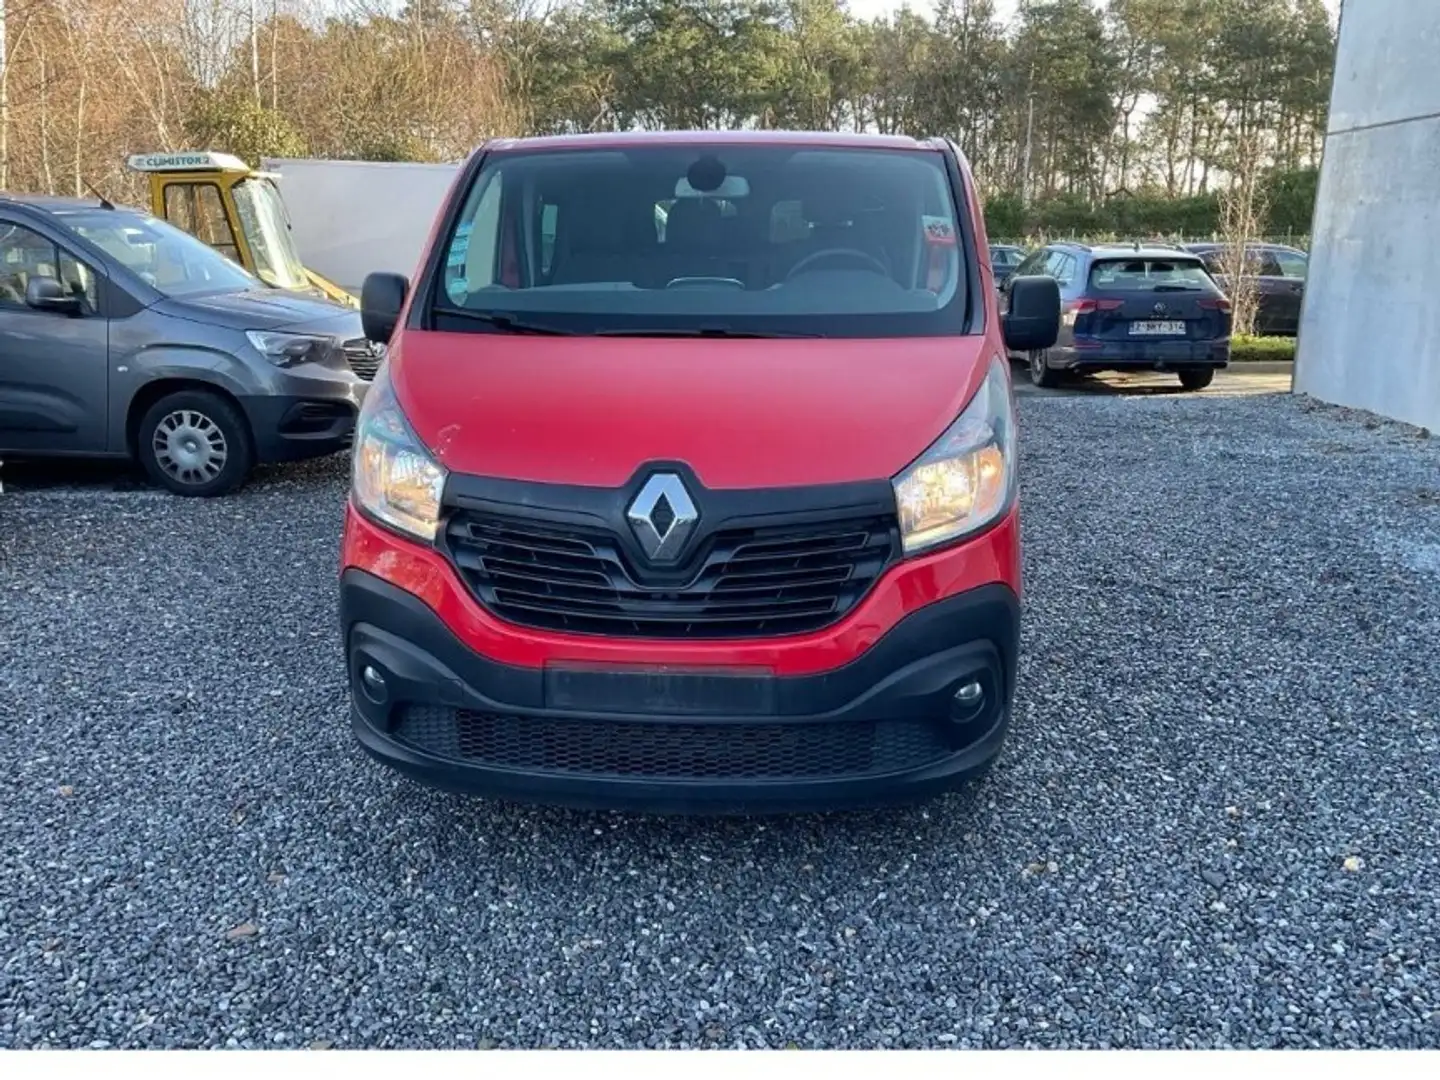 Renault Trafic 1.6 dci 105000km 6 personnes utilitaires ct ok Rood - 1